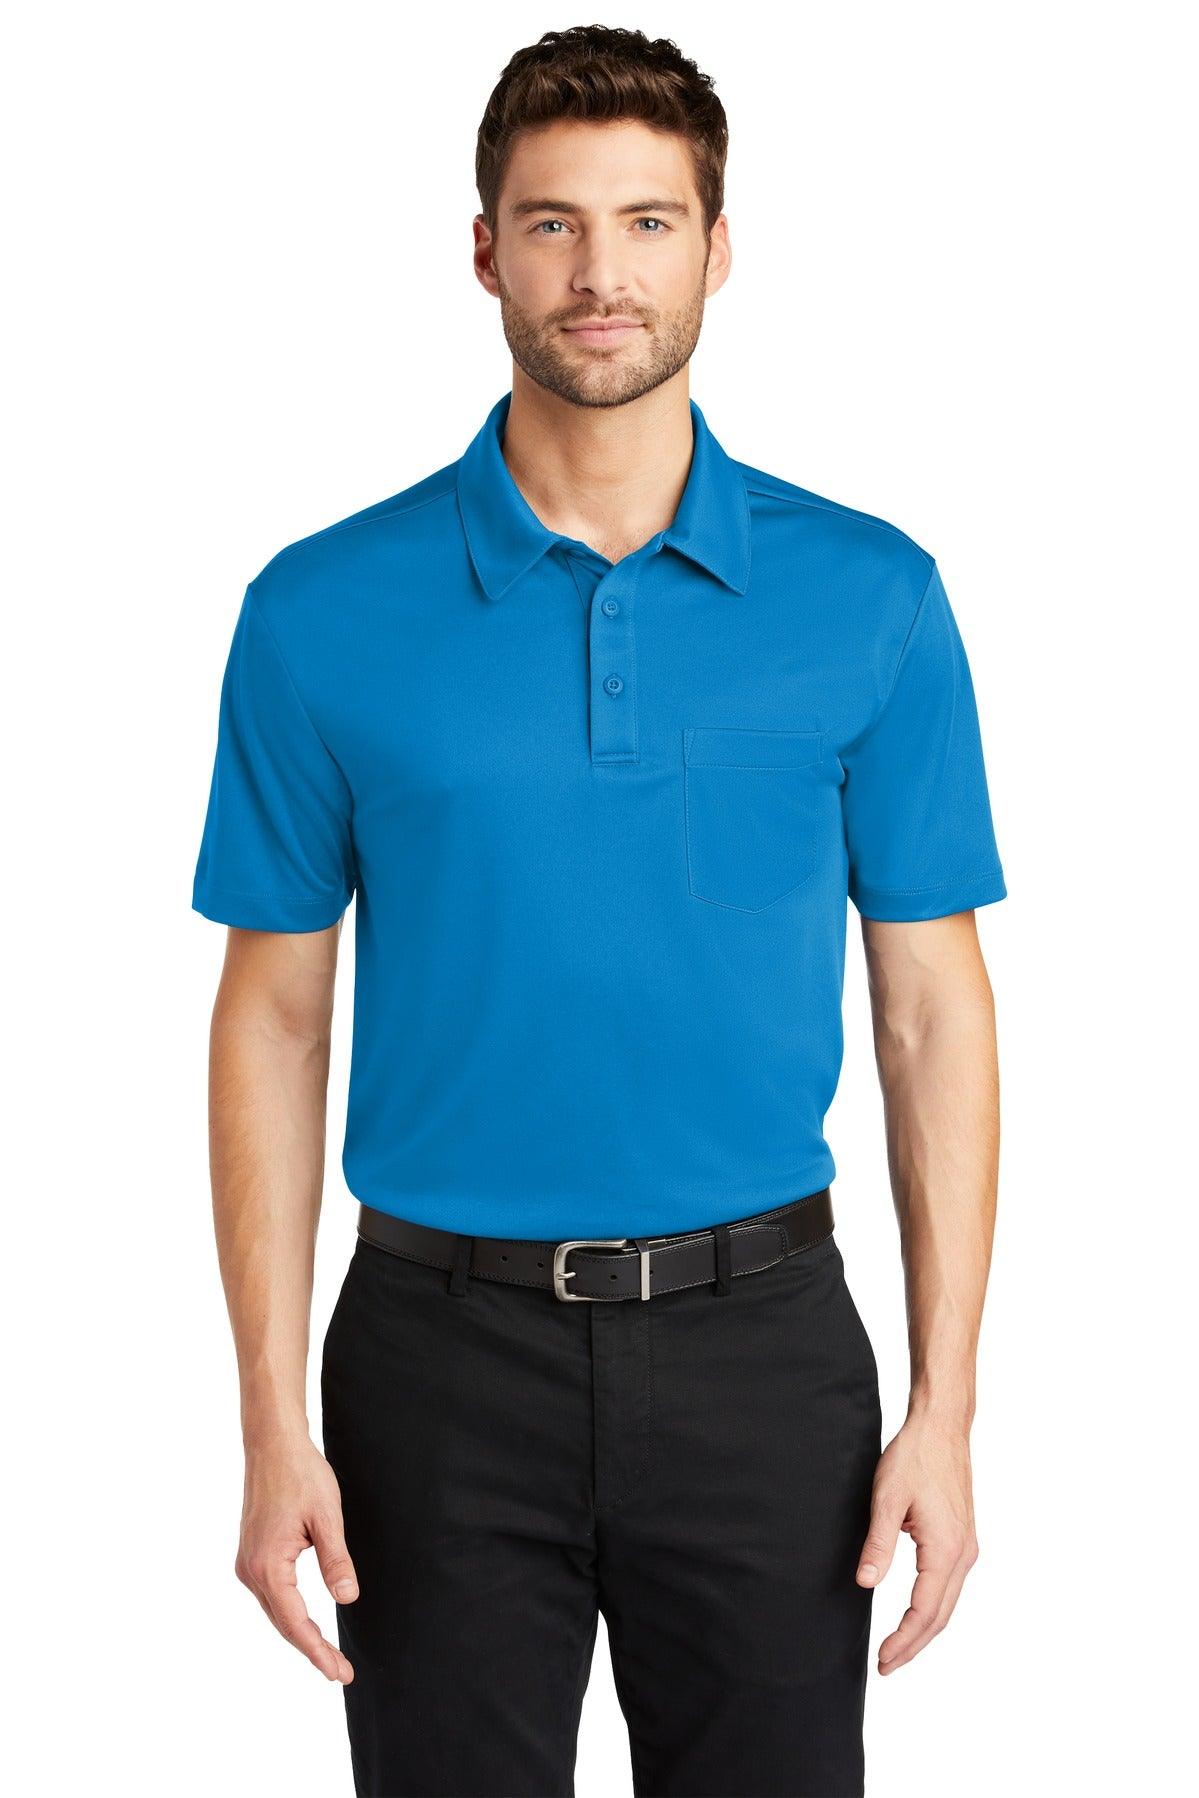 Port Authority Silk Touch Performance Pocket Polo. K540P - Dresses Max